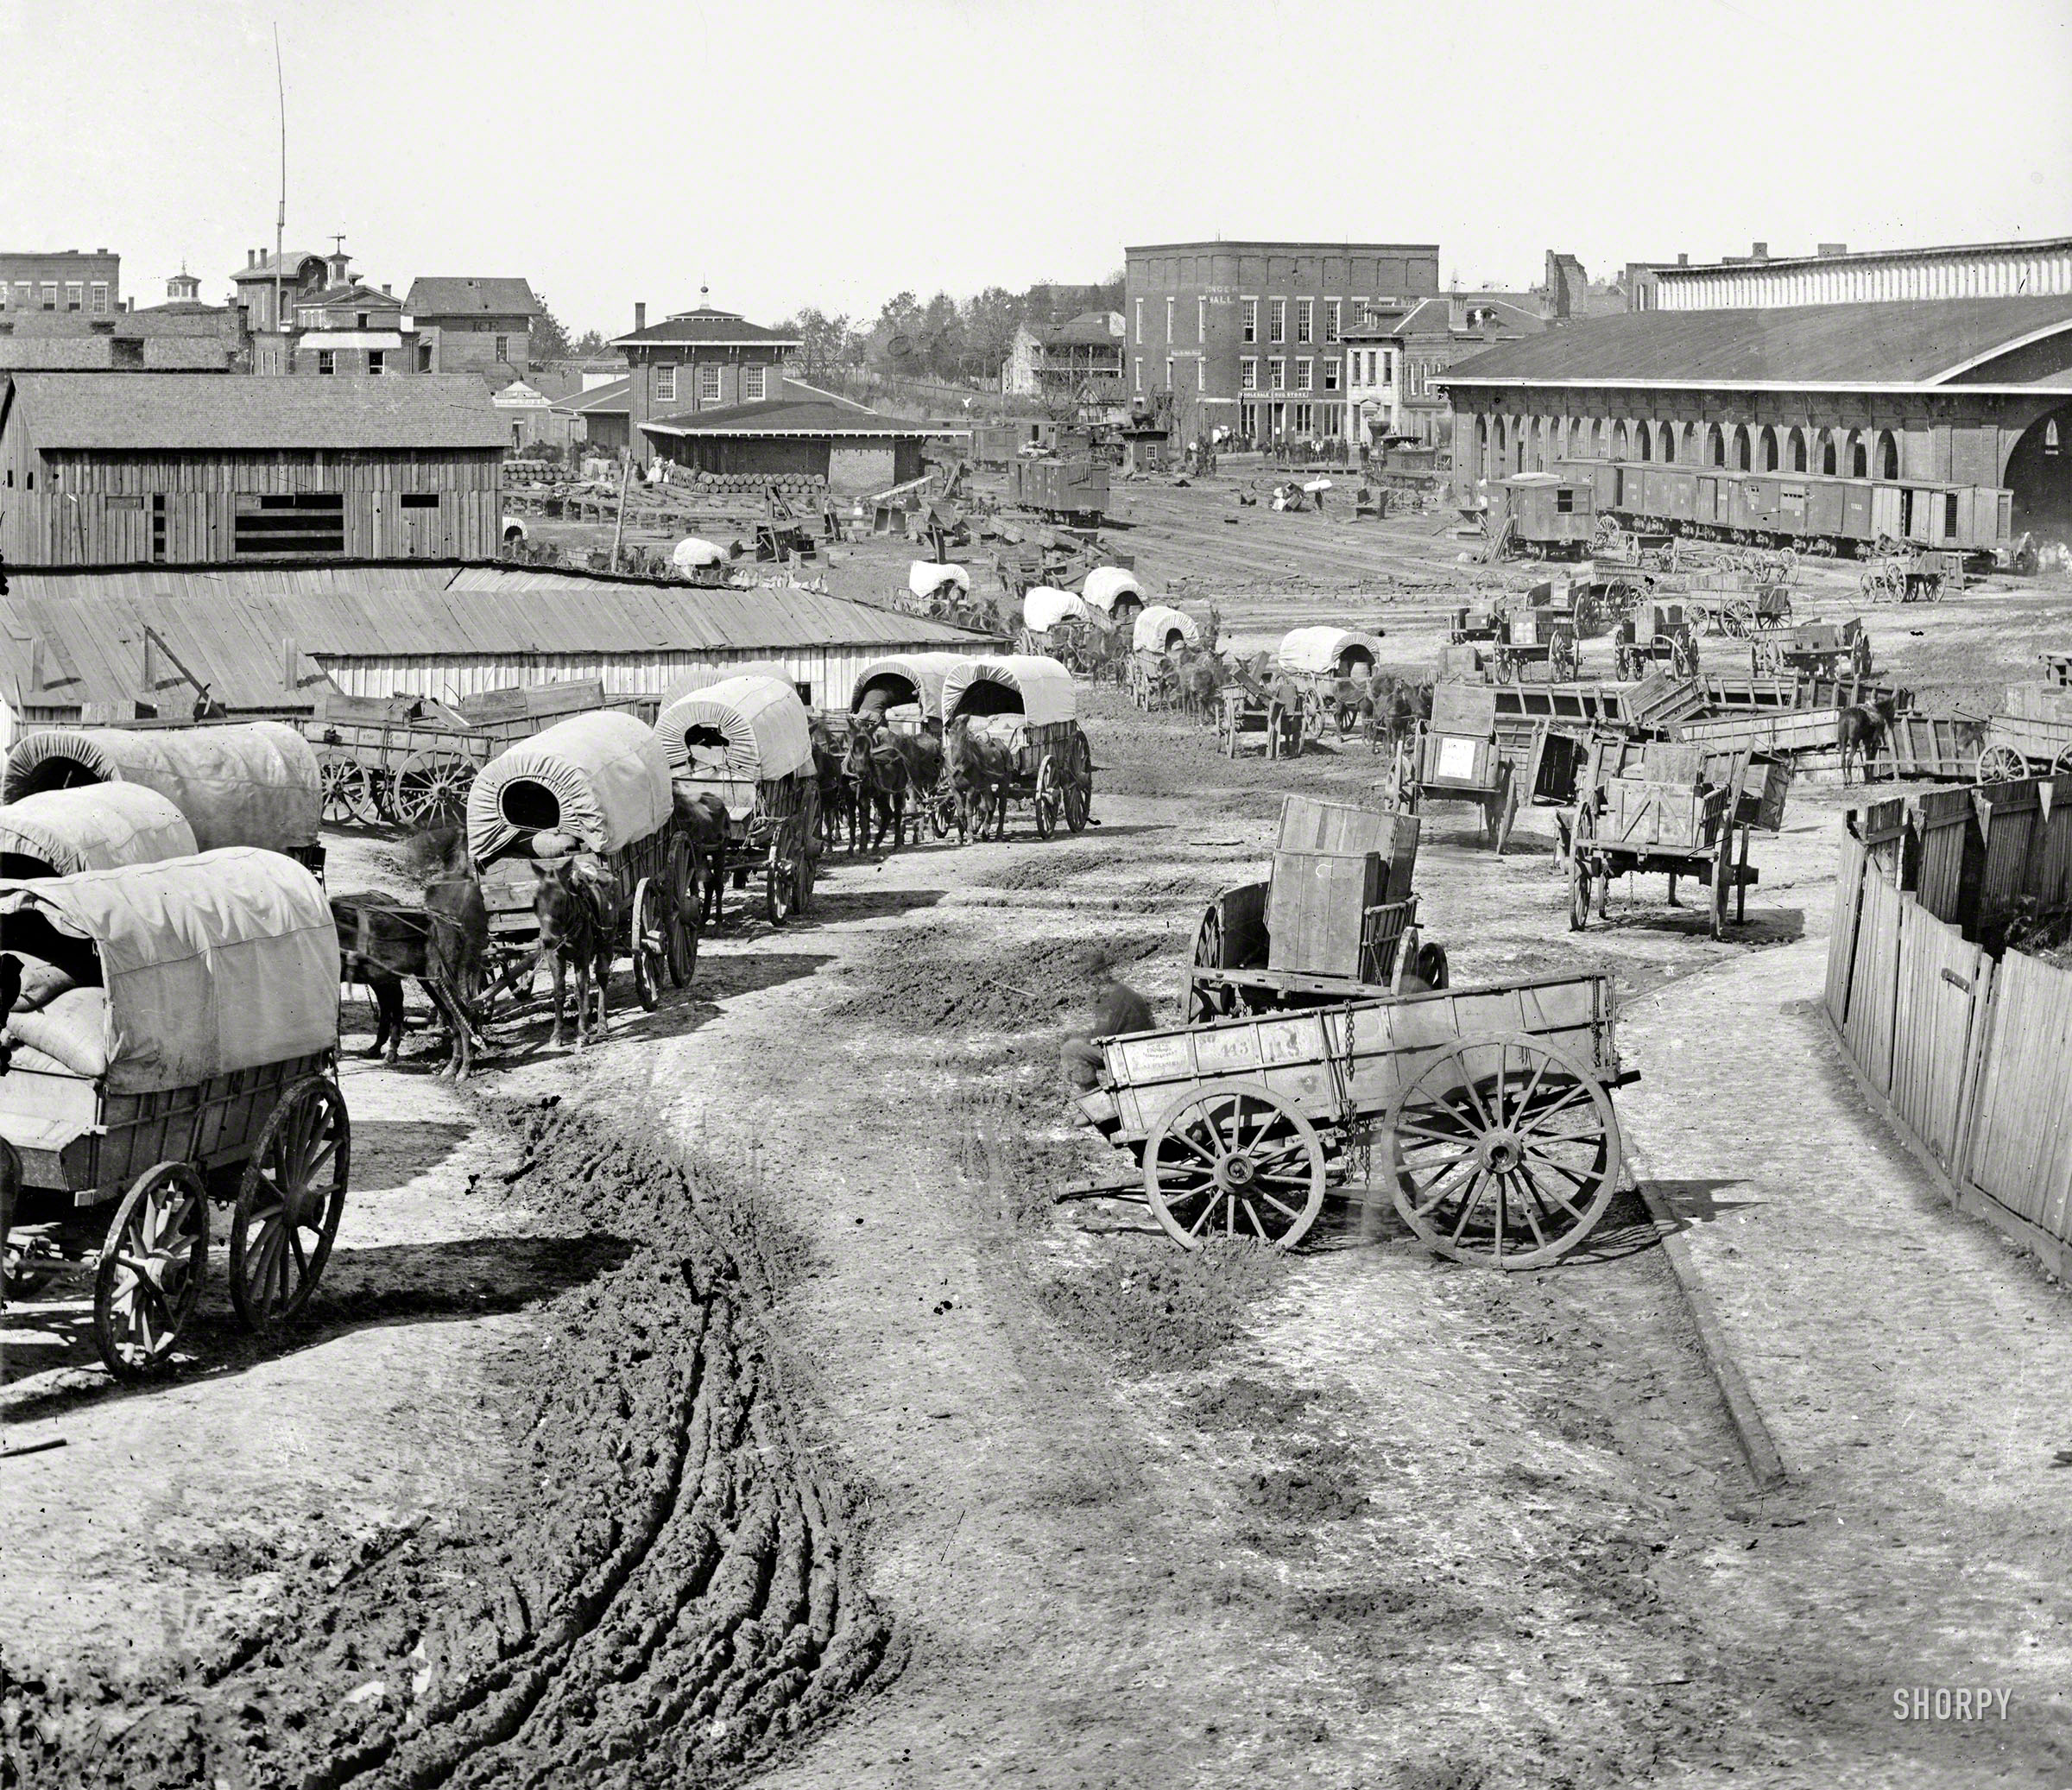 Atlanta, 1864. "Federal Army wagons at railroad depot." And maybe Scarlett O'Hara in the distance. Wet plate negative by George N. Barnard. View full size.